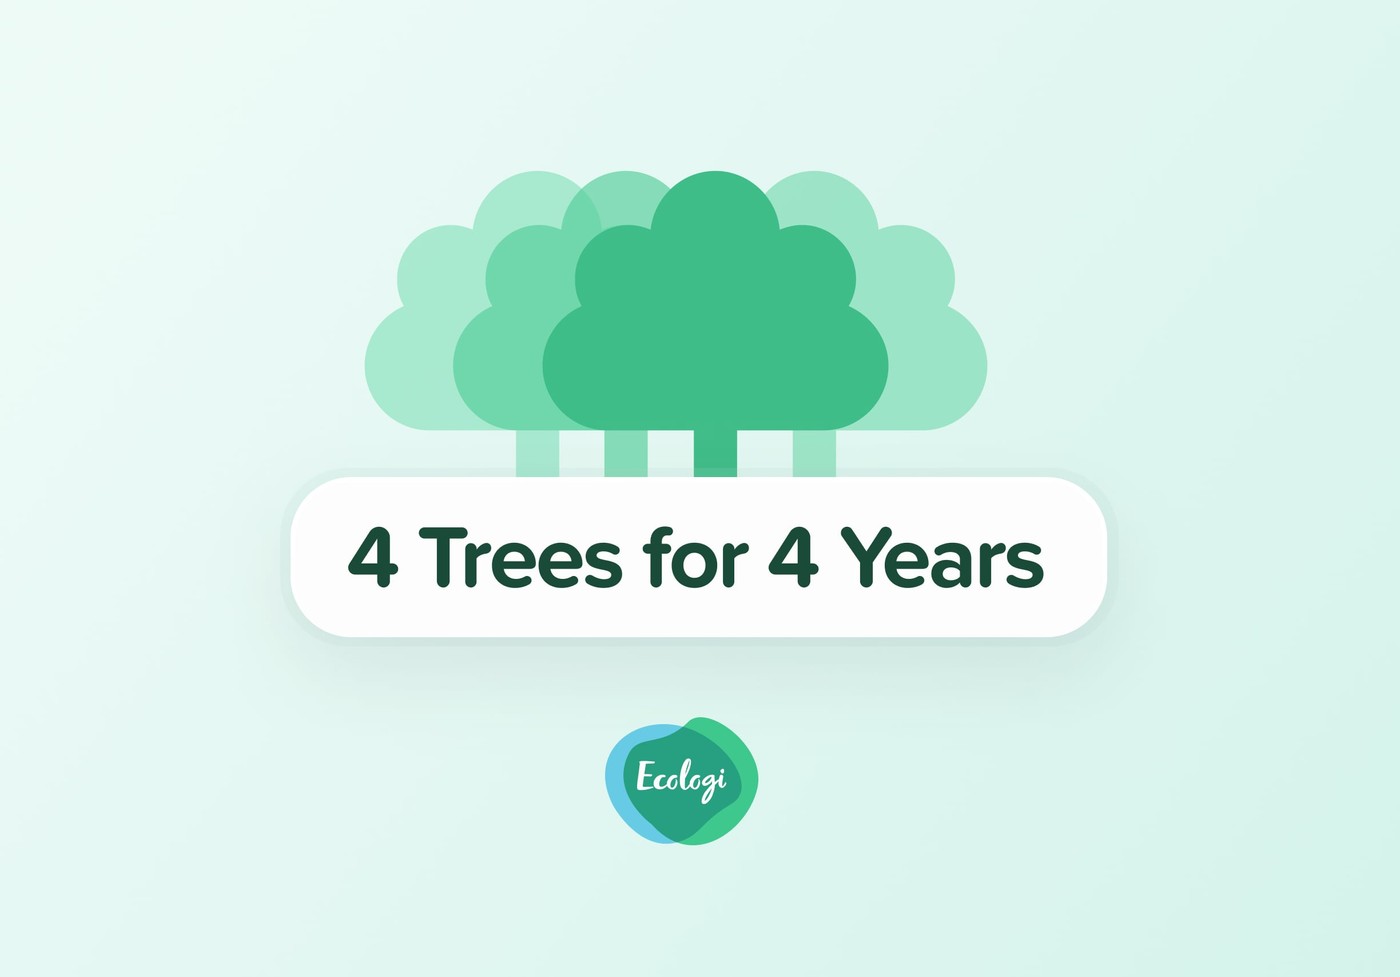 4 Trees for 4 Years